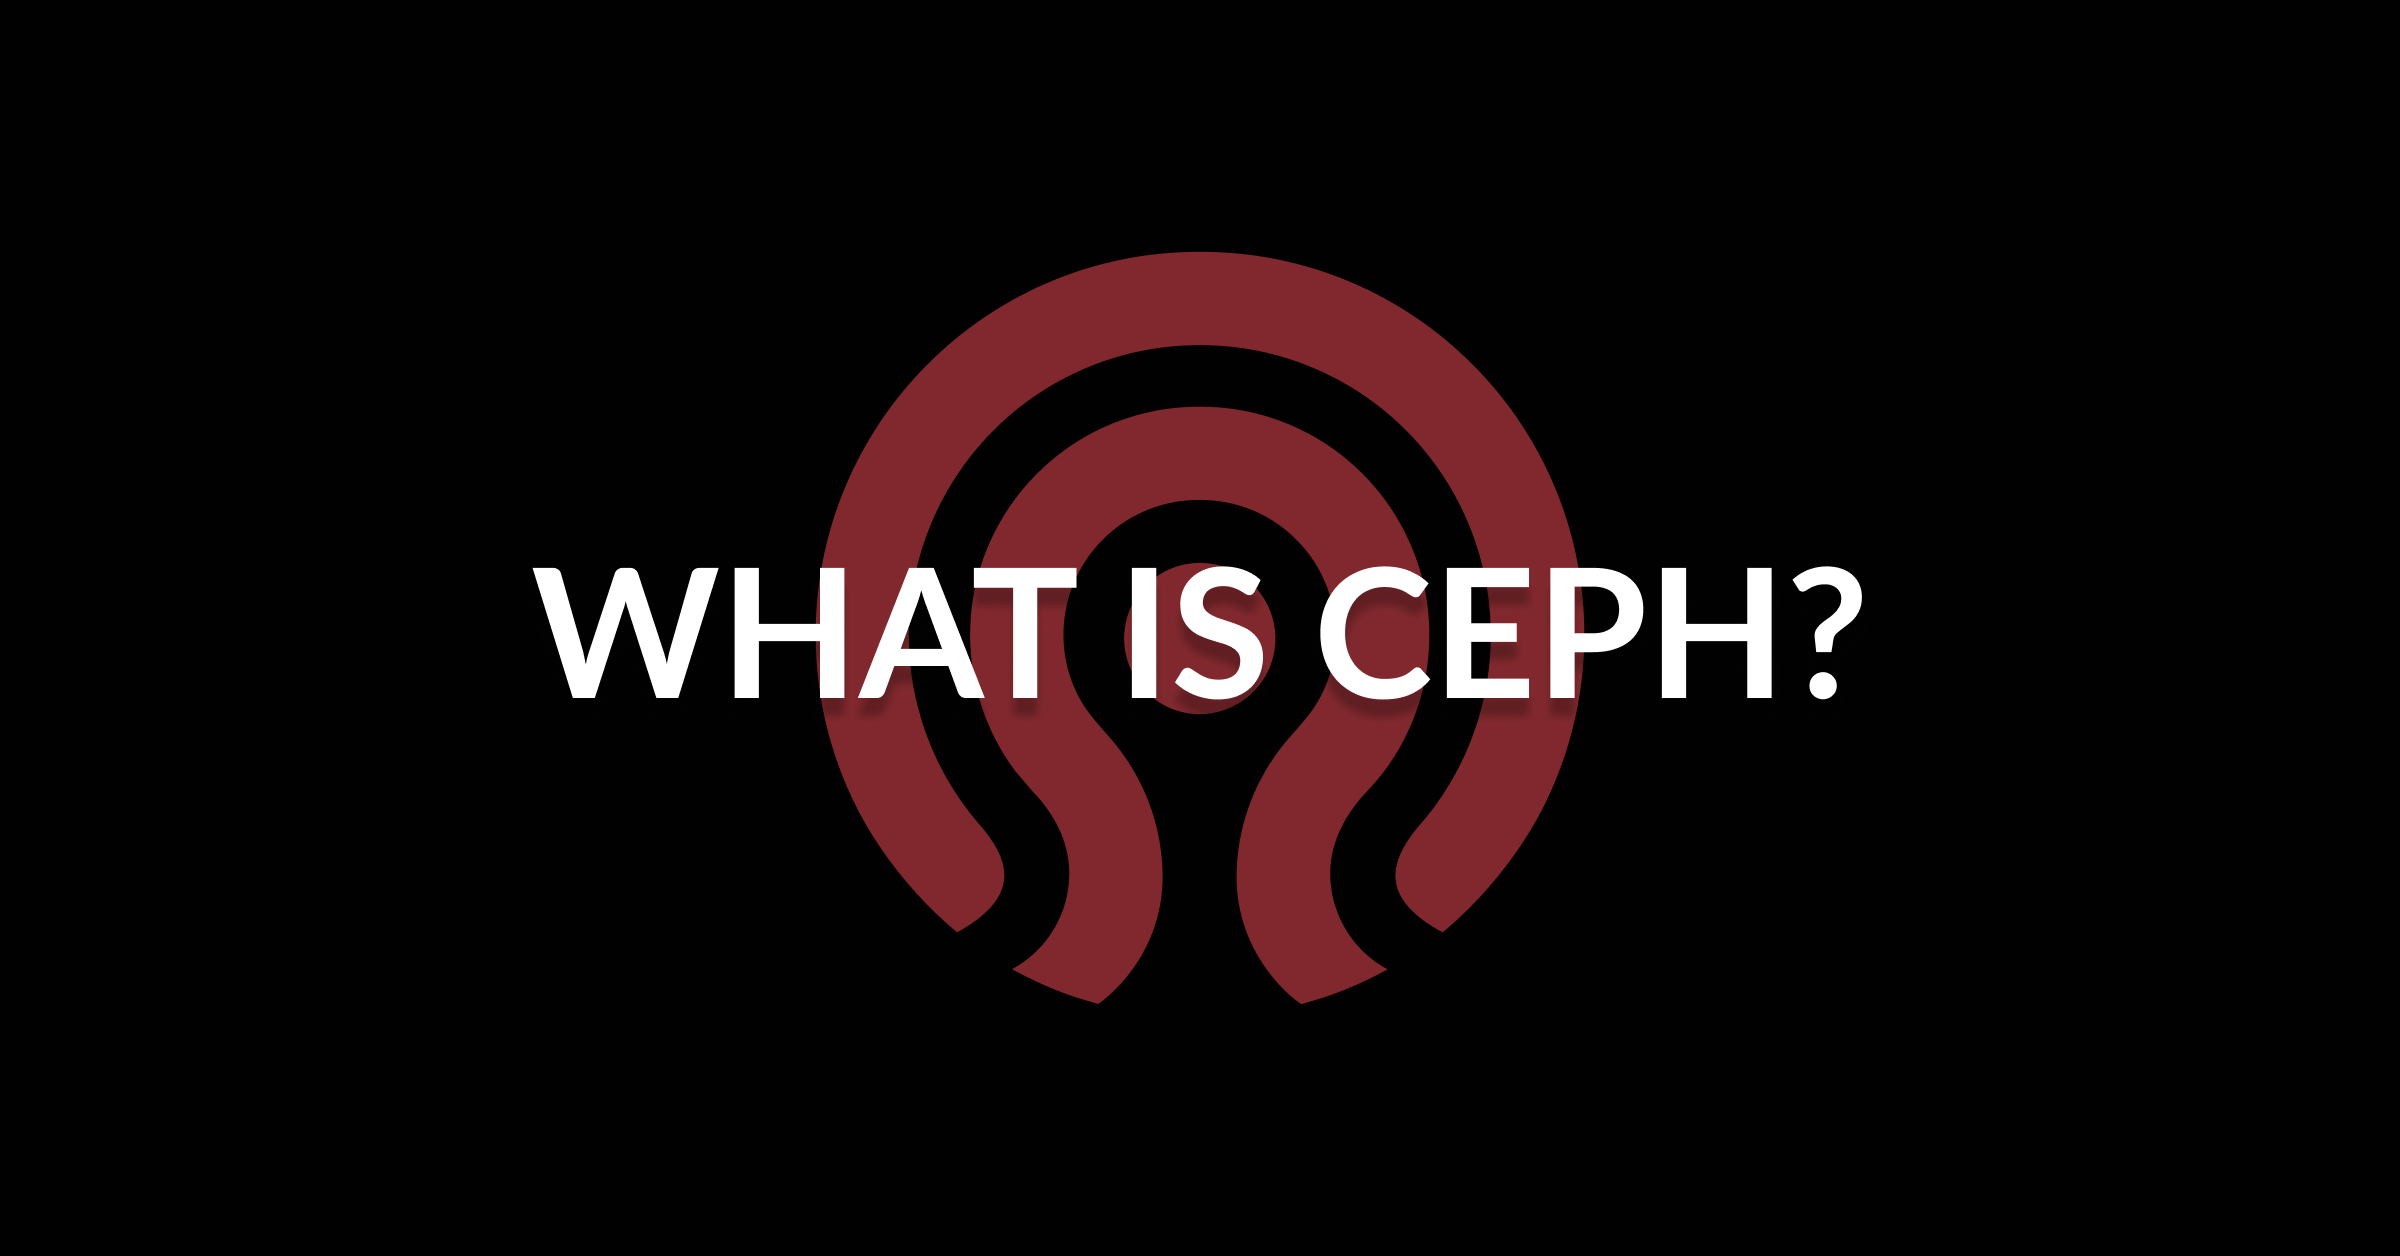 1200_628_what is ceph@2x (1).png